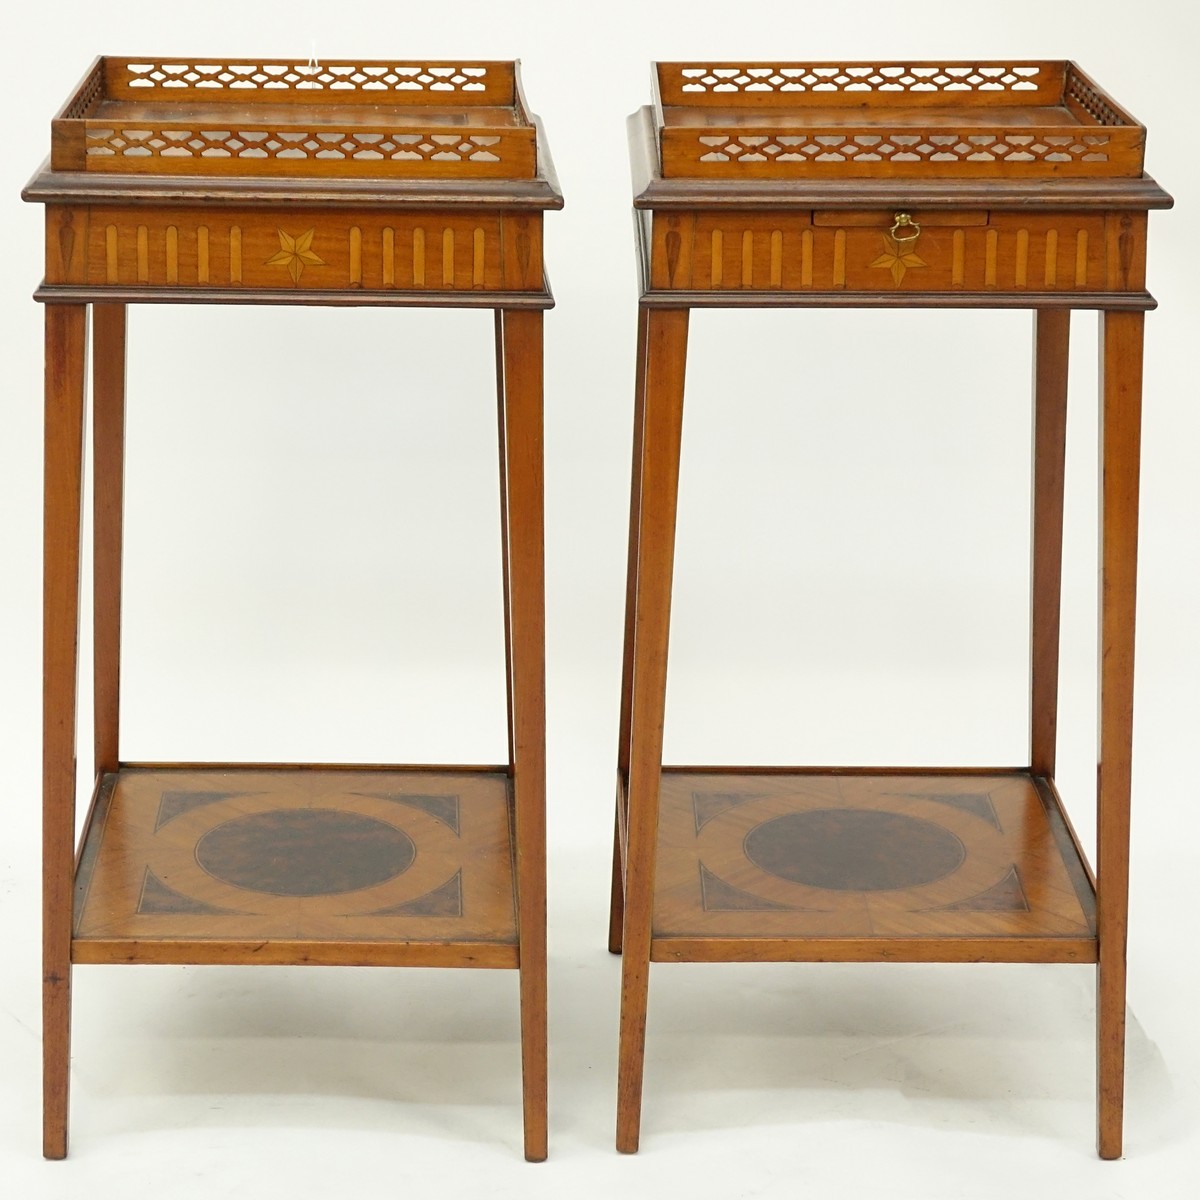 Pair of Edwardian Burled Inlaid Two Tiered Pedestal Tables with Gallery to Top. Sliding platform to top.